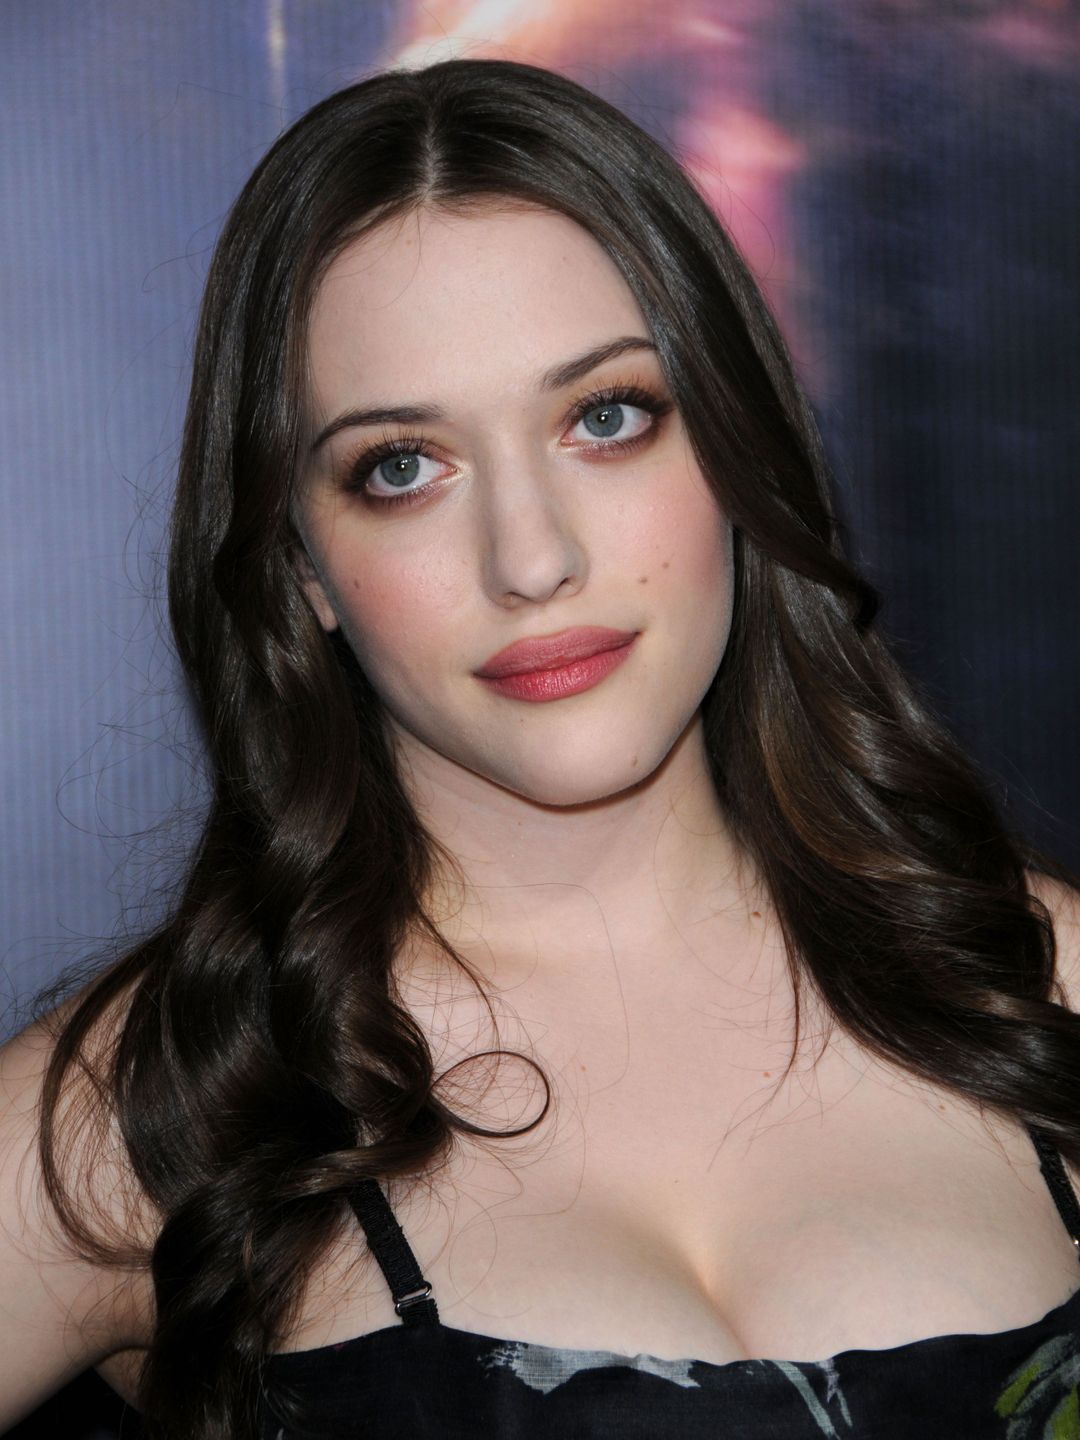 Kat Dennings in her youth